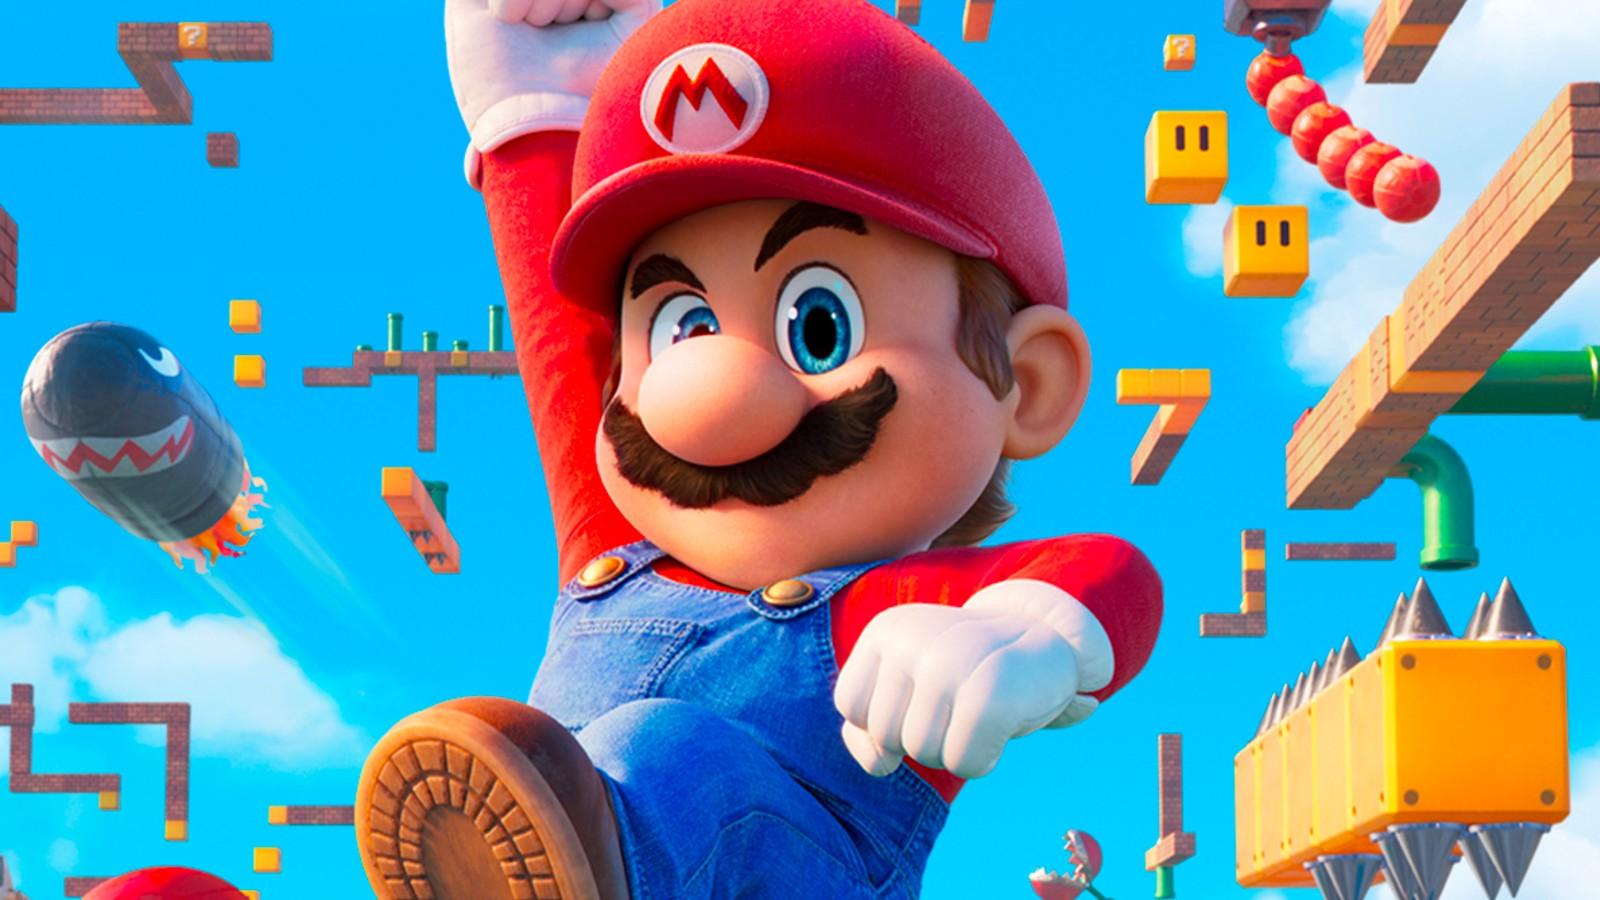 The poster for the new Super Mario Bros movie